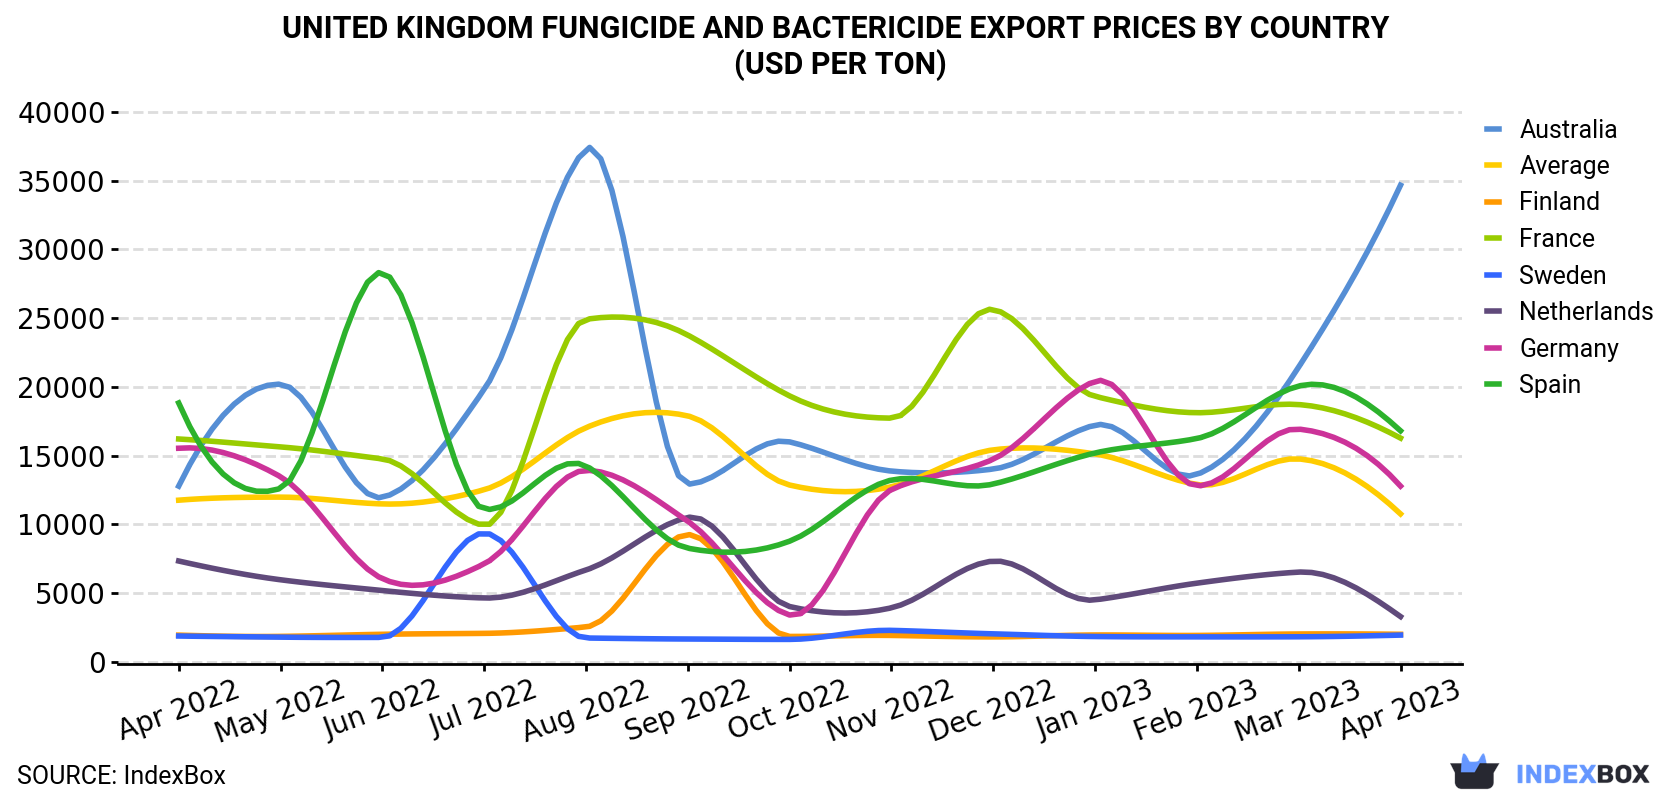 United Kingdom Fungicide And Bactericide Export Prices By Country (USD Per Ton)